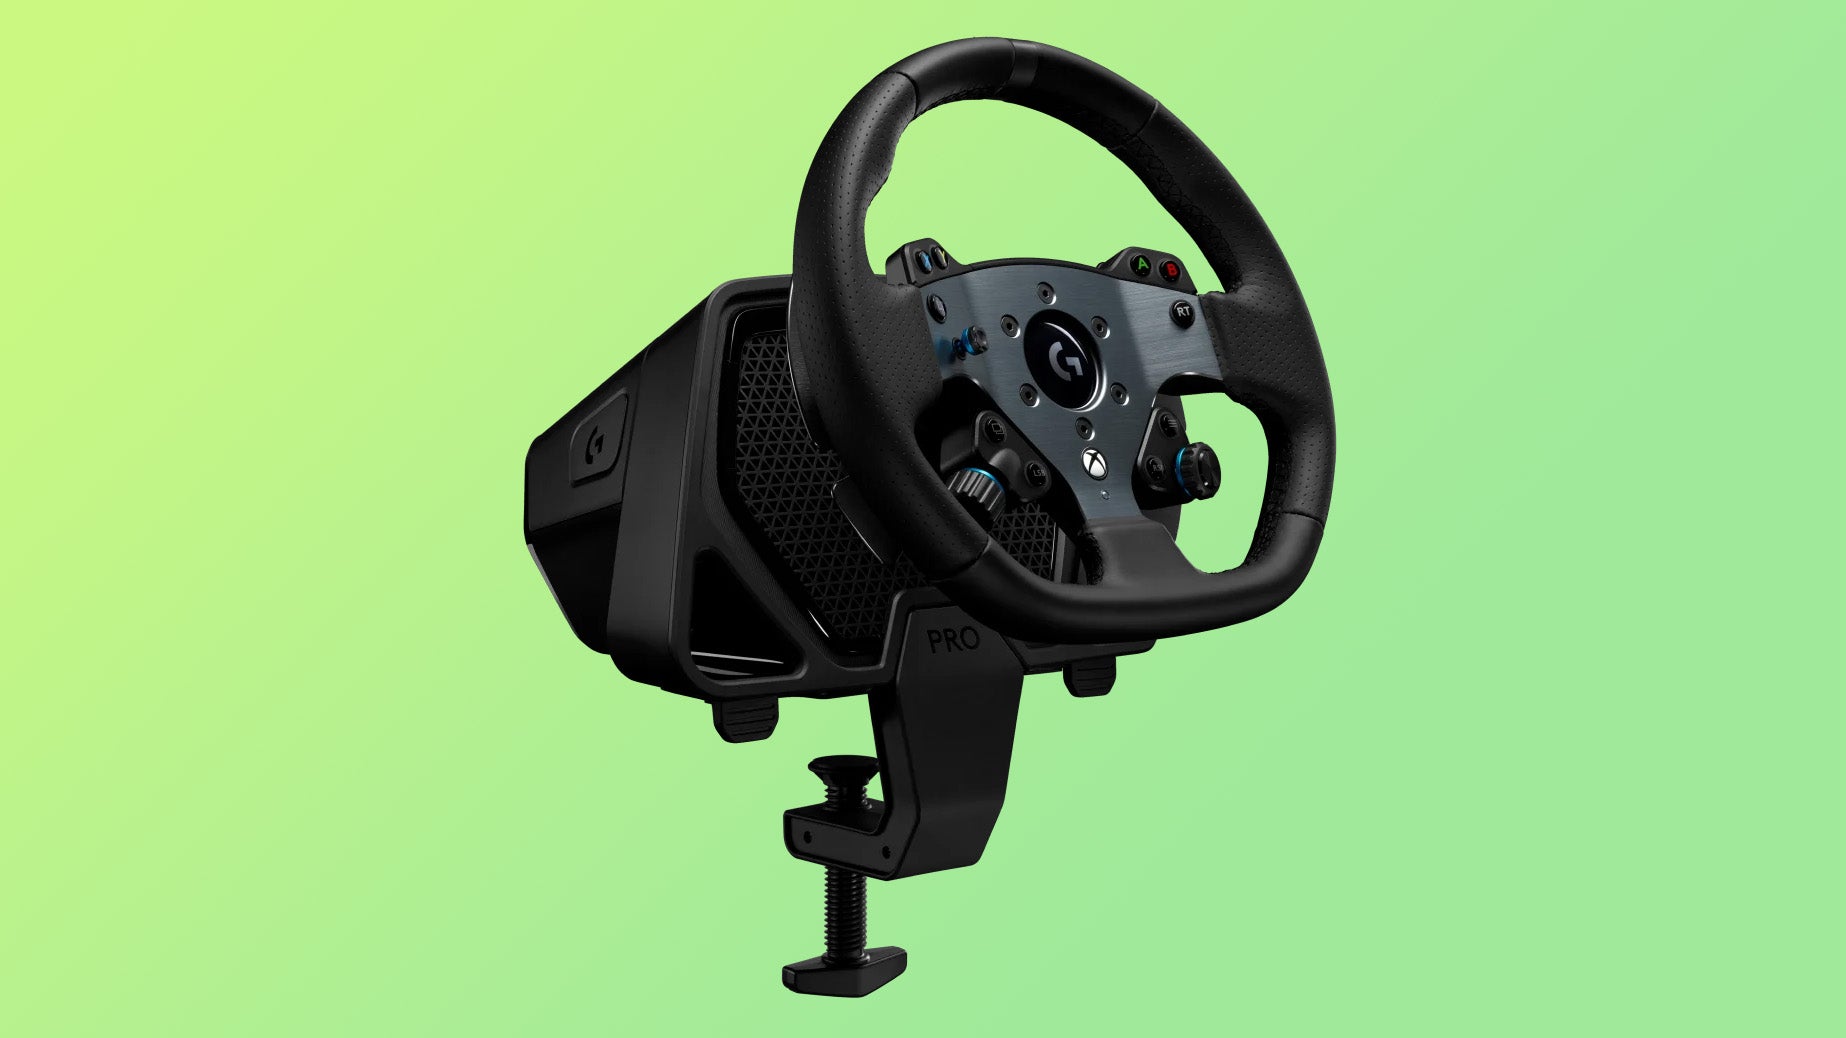 Logitech Pro Racing Wheel, Pro Racing Pedals and Playseat Trophy 